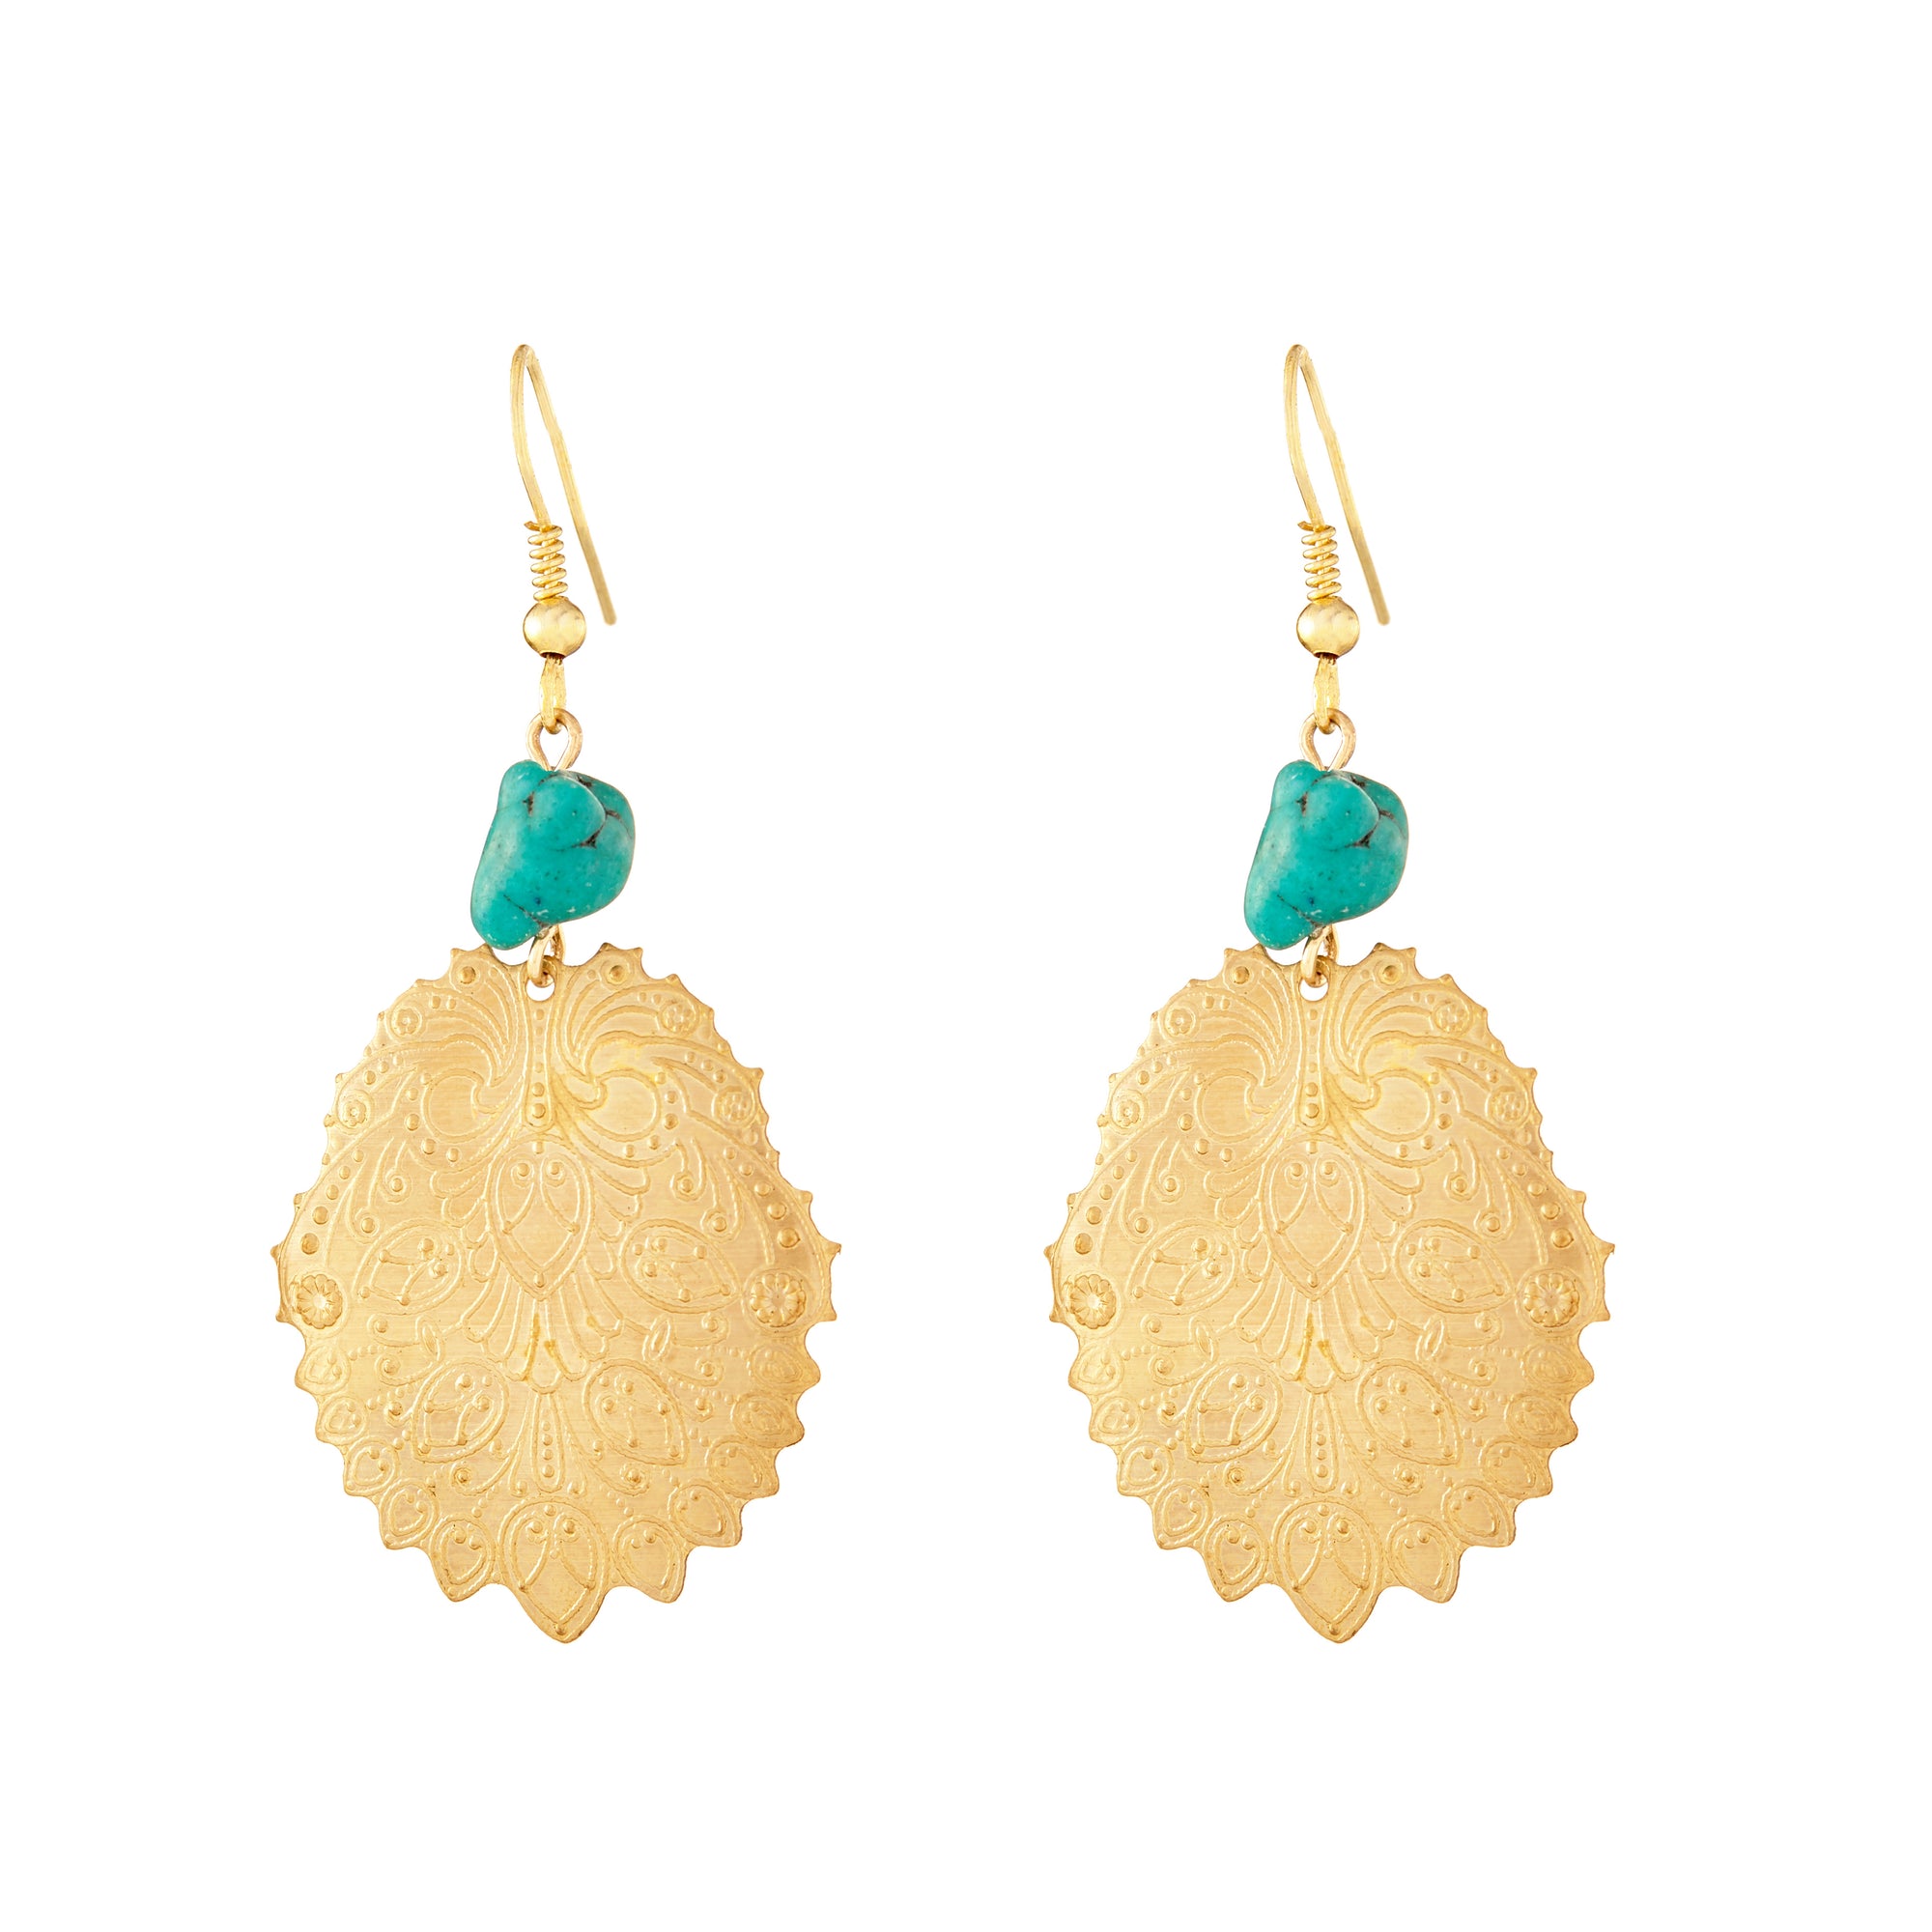 Stamped Gold and Turquoise Dangle Earrings